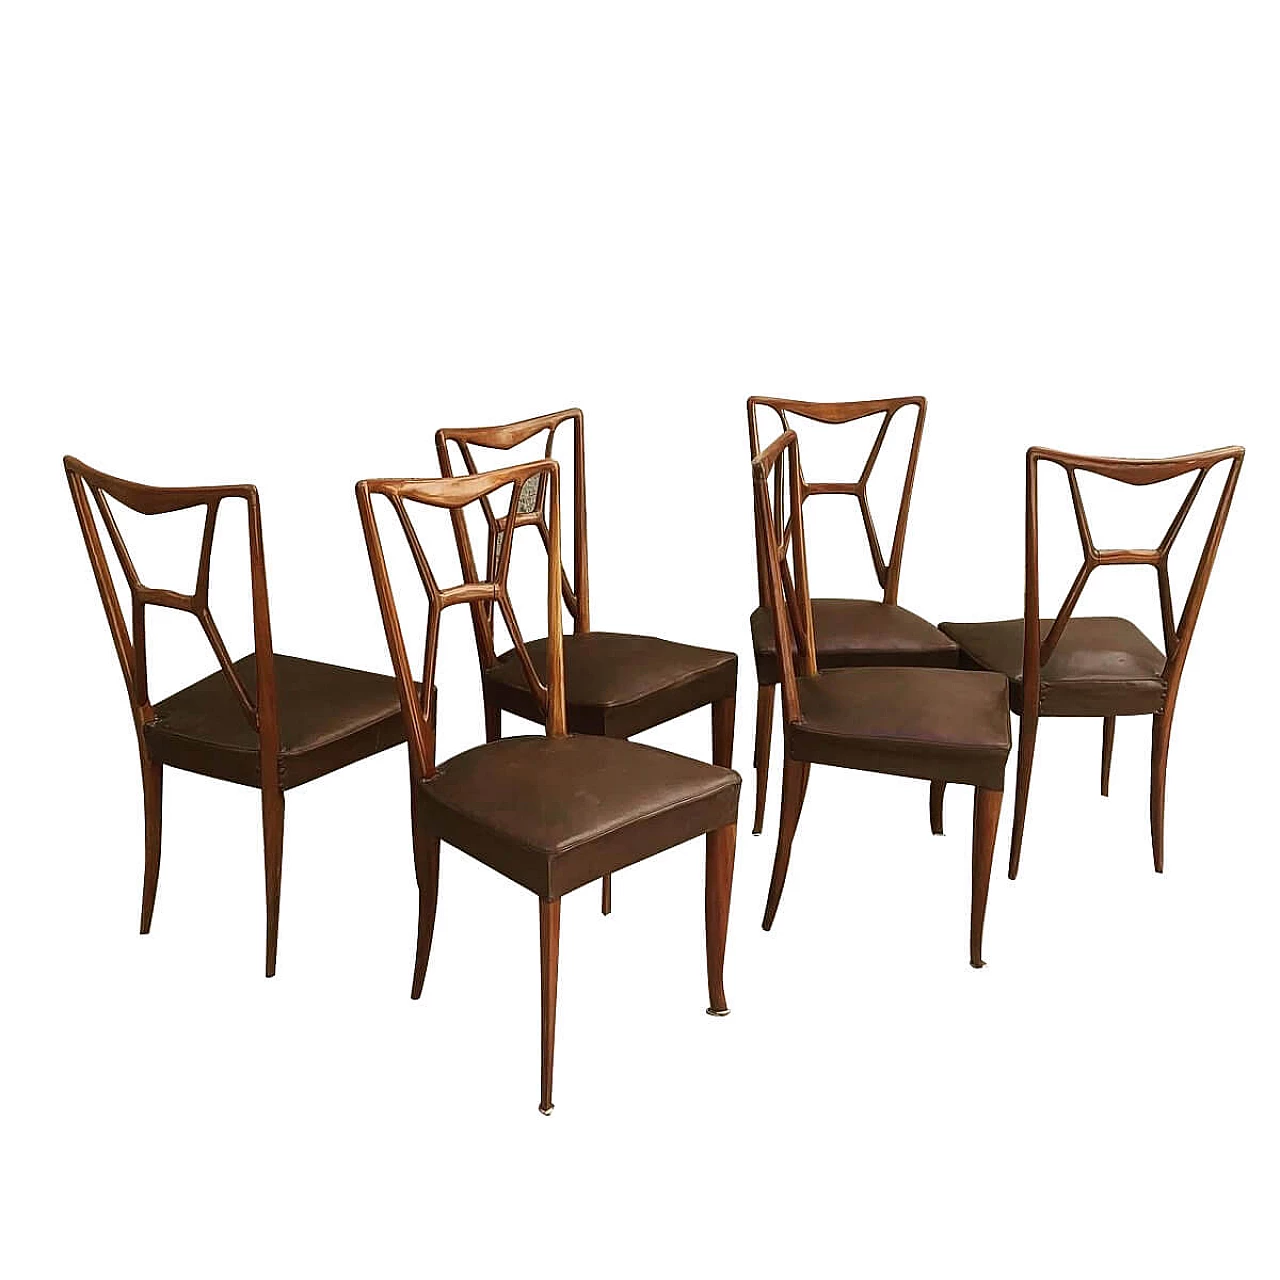 6 Chairs in the style of Paolo Buffa in walnut, skai and brass, 50s 1274641